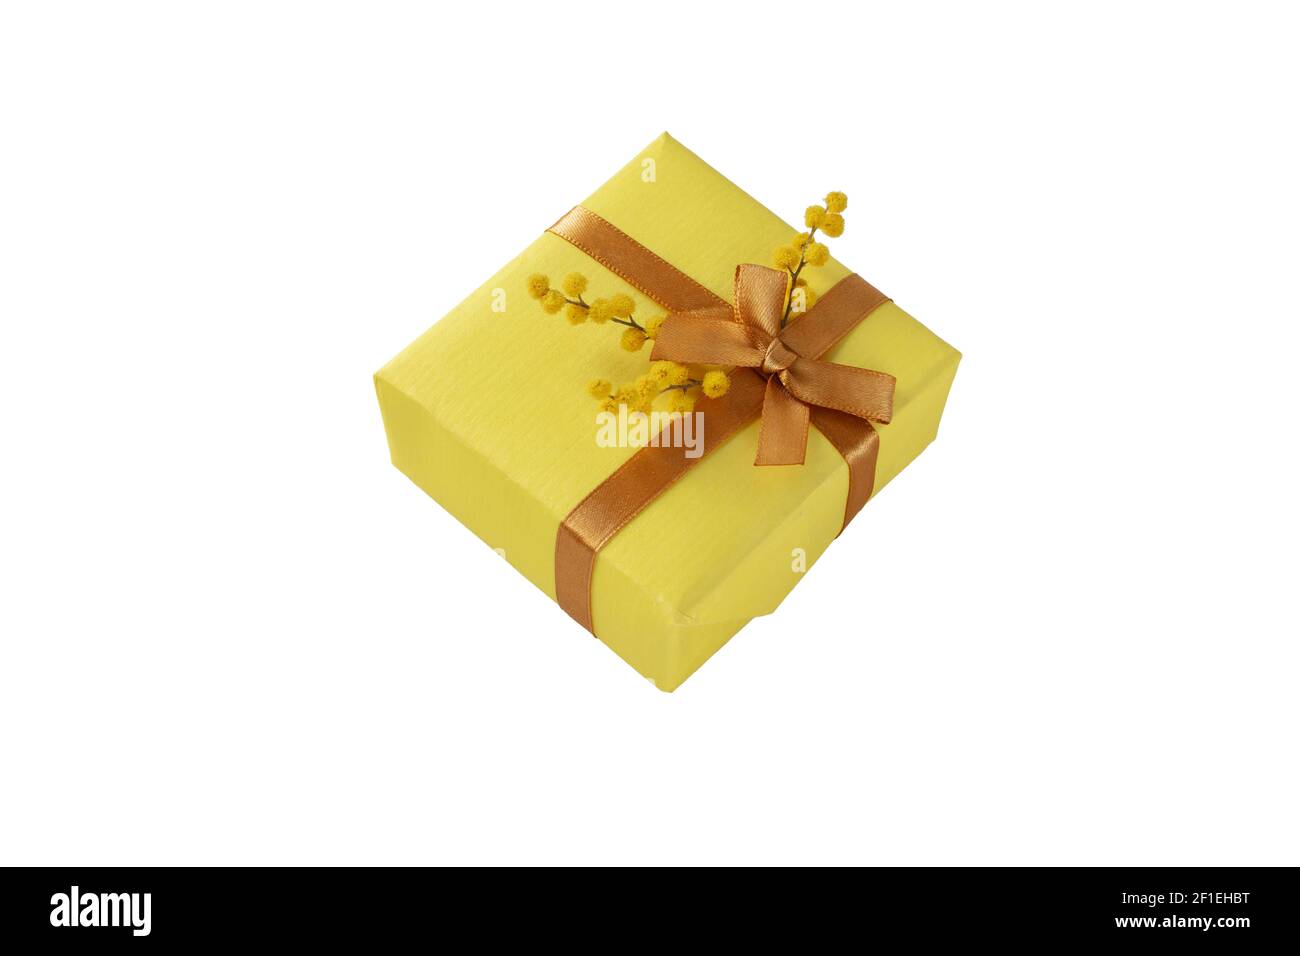 Spring holidays gift box with golden ribbon bow and mimosa flowers isolated on white. Present wrapped with yellow paper. Stock Photo